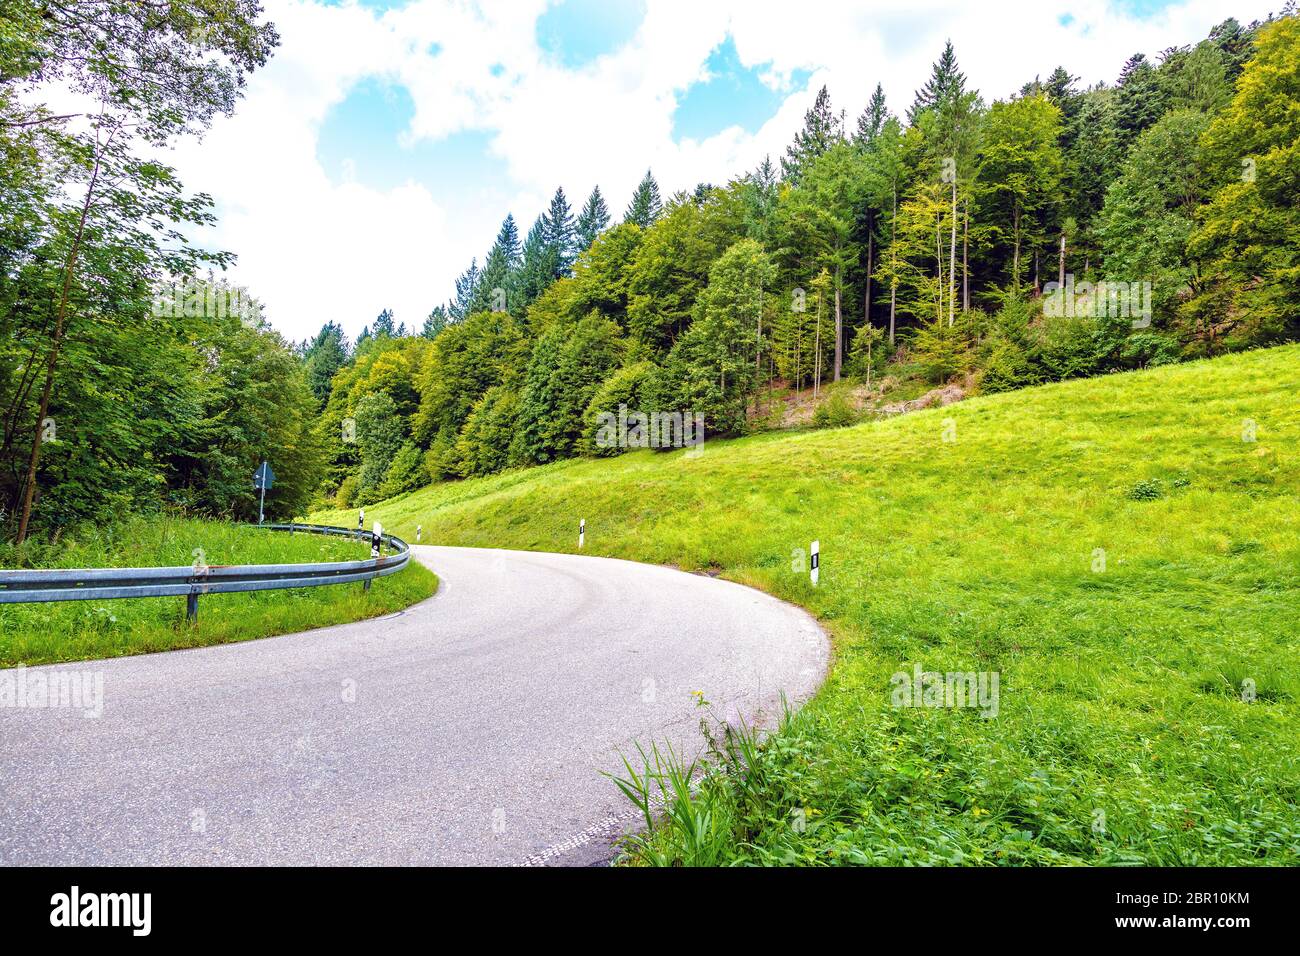 Tarred road winding through lush green countryside with spring forest in an alpine valley in a travel and tourism concept Stock Photo